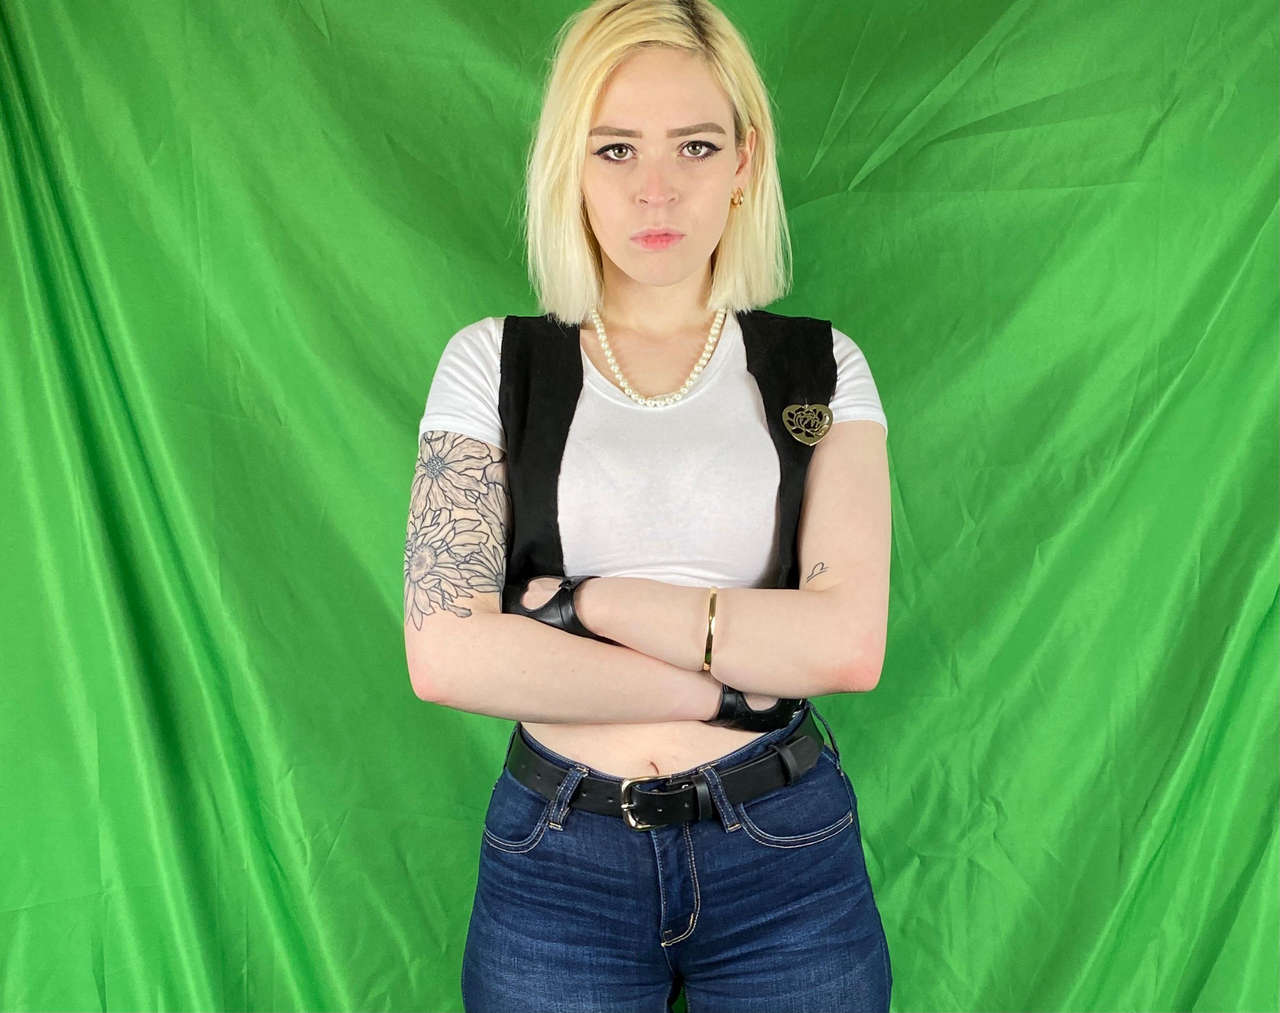 My Android 18 Cosplay It Was A Just For Fun Last Minute Type Of Project